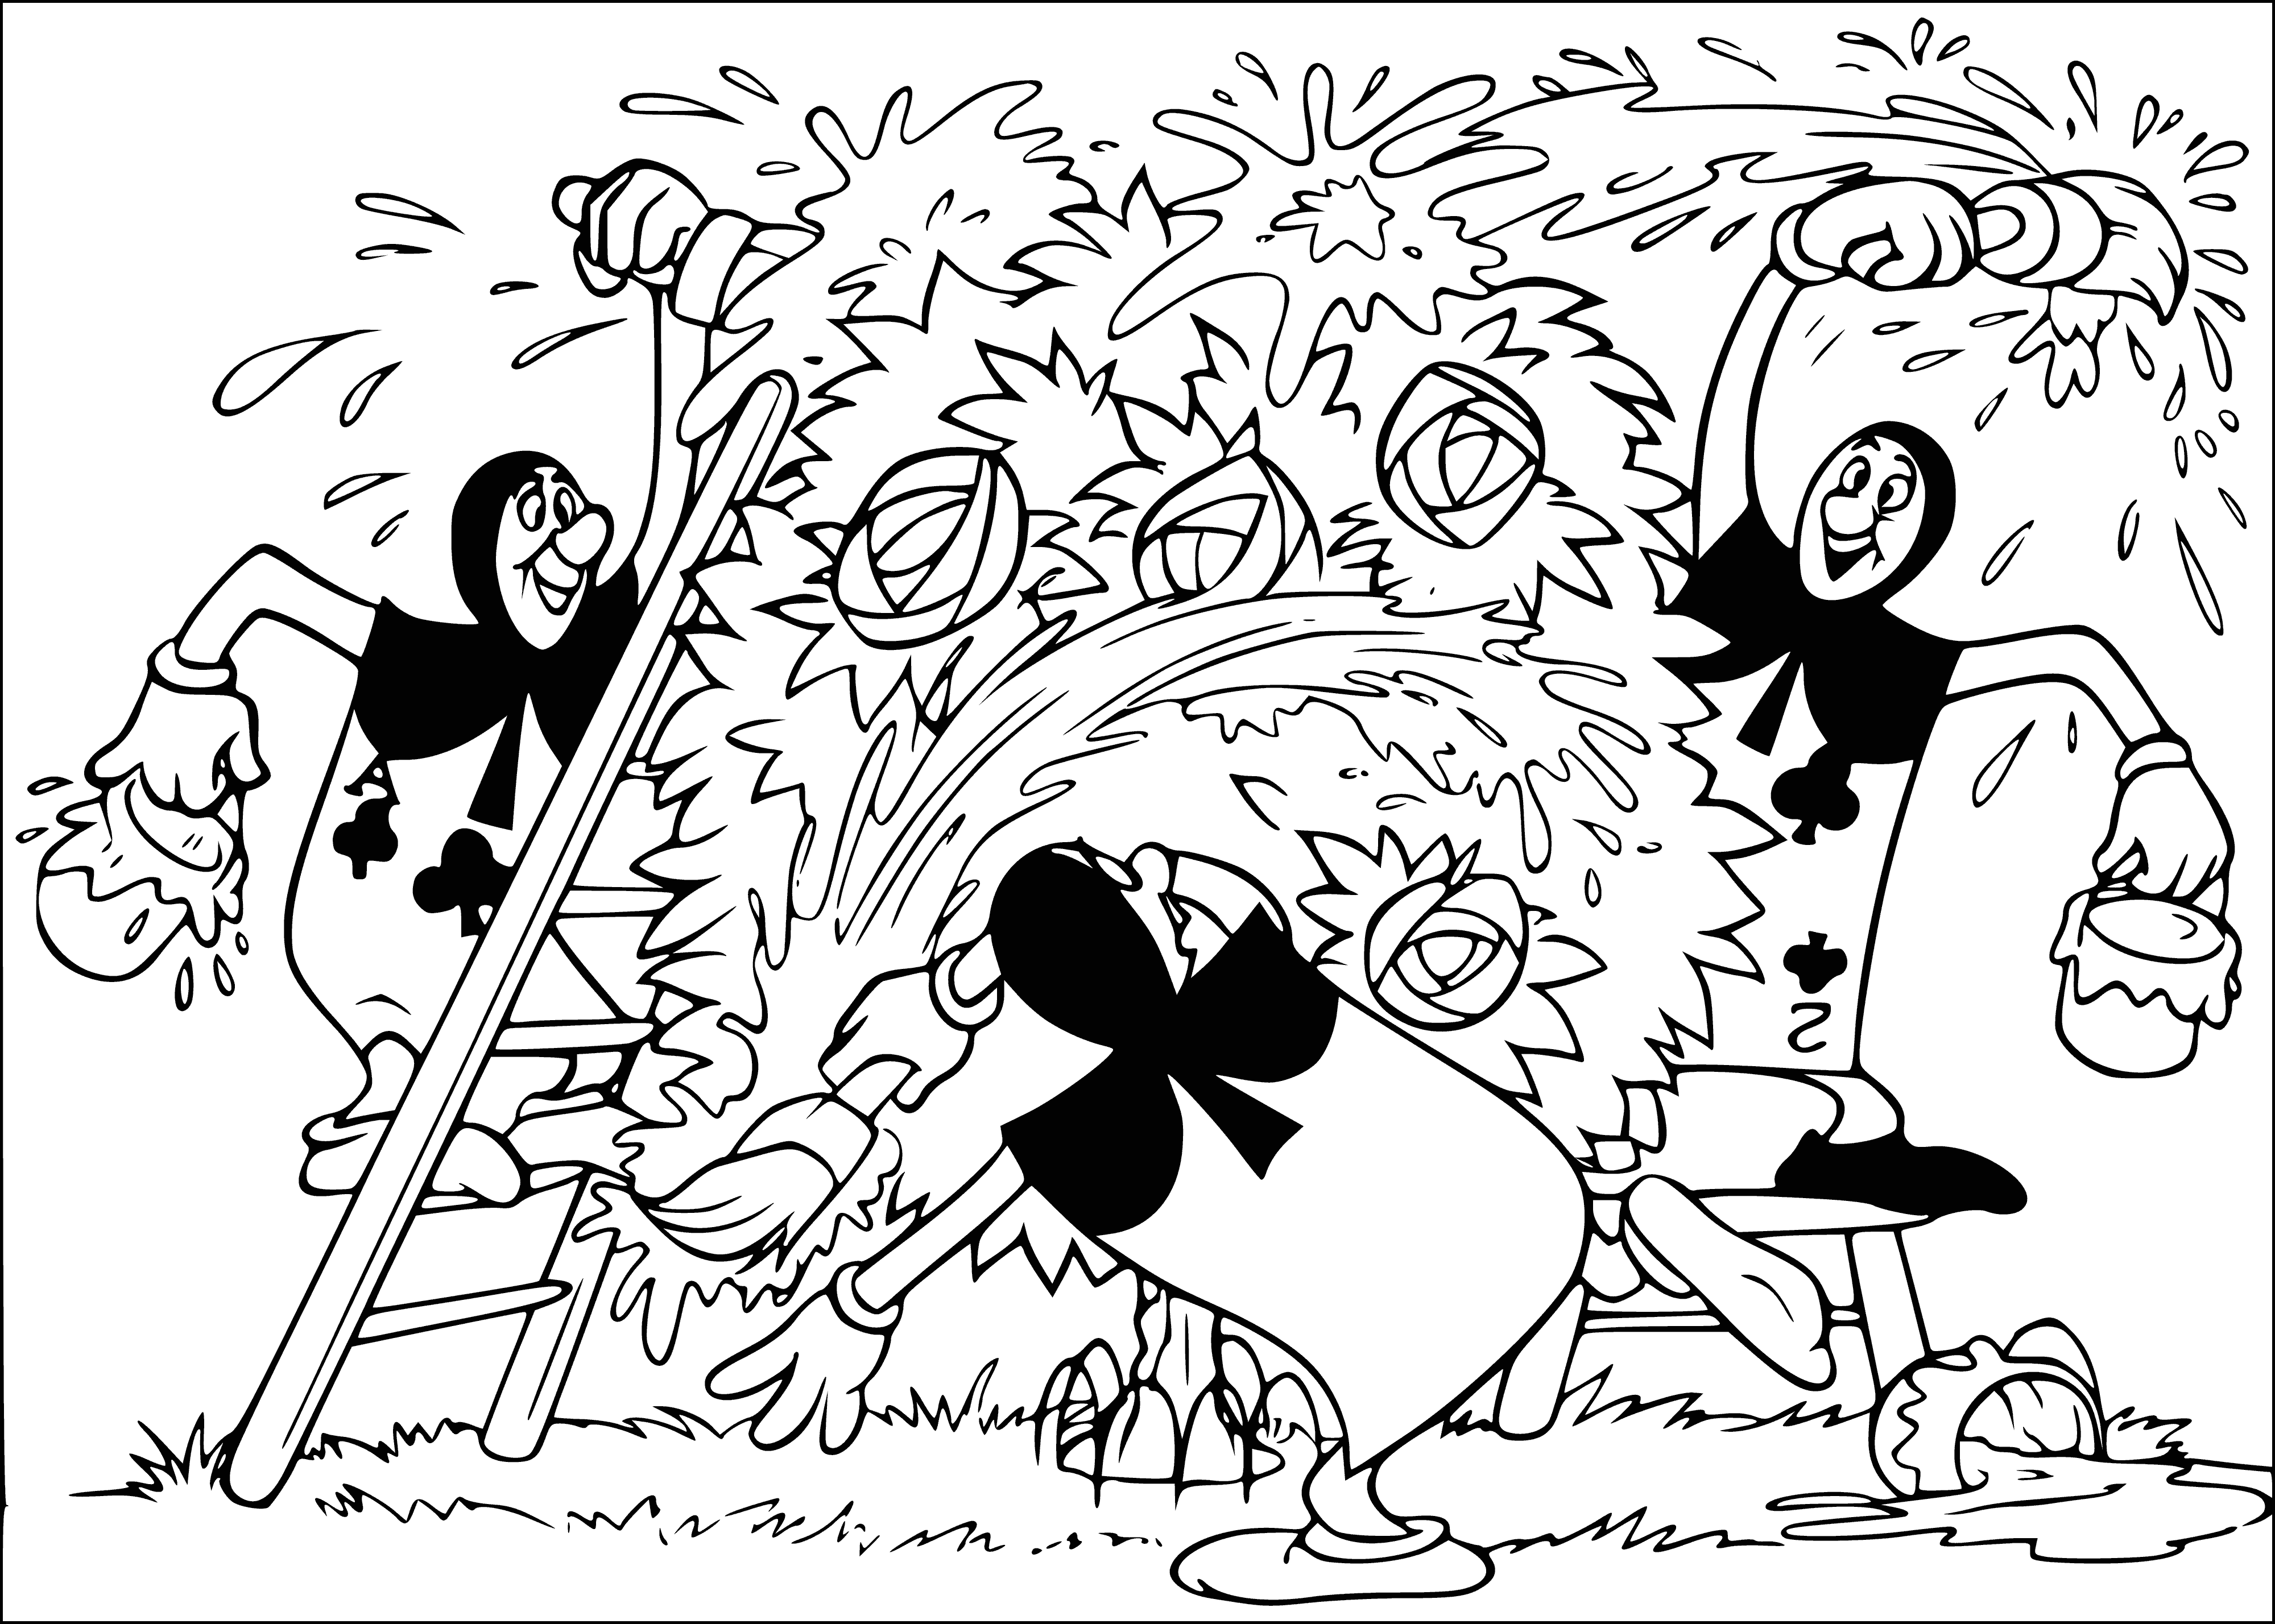 coloring page: Alice, enchanted by the grinning Cheshire Cat, picks a velvety crimson rose from the bush when confronted by its beauty.